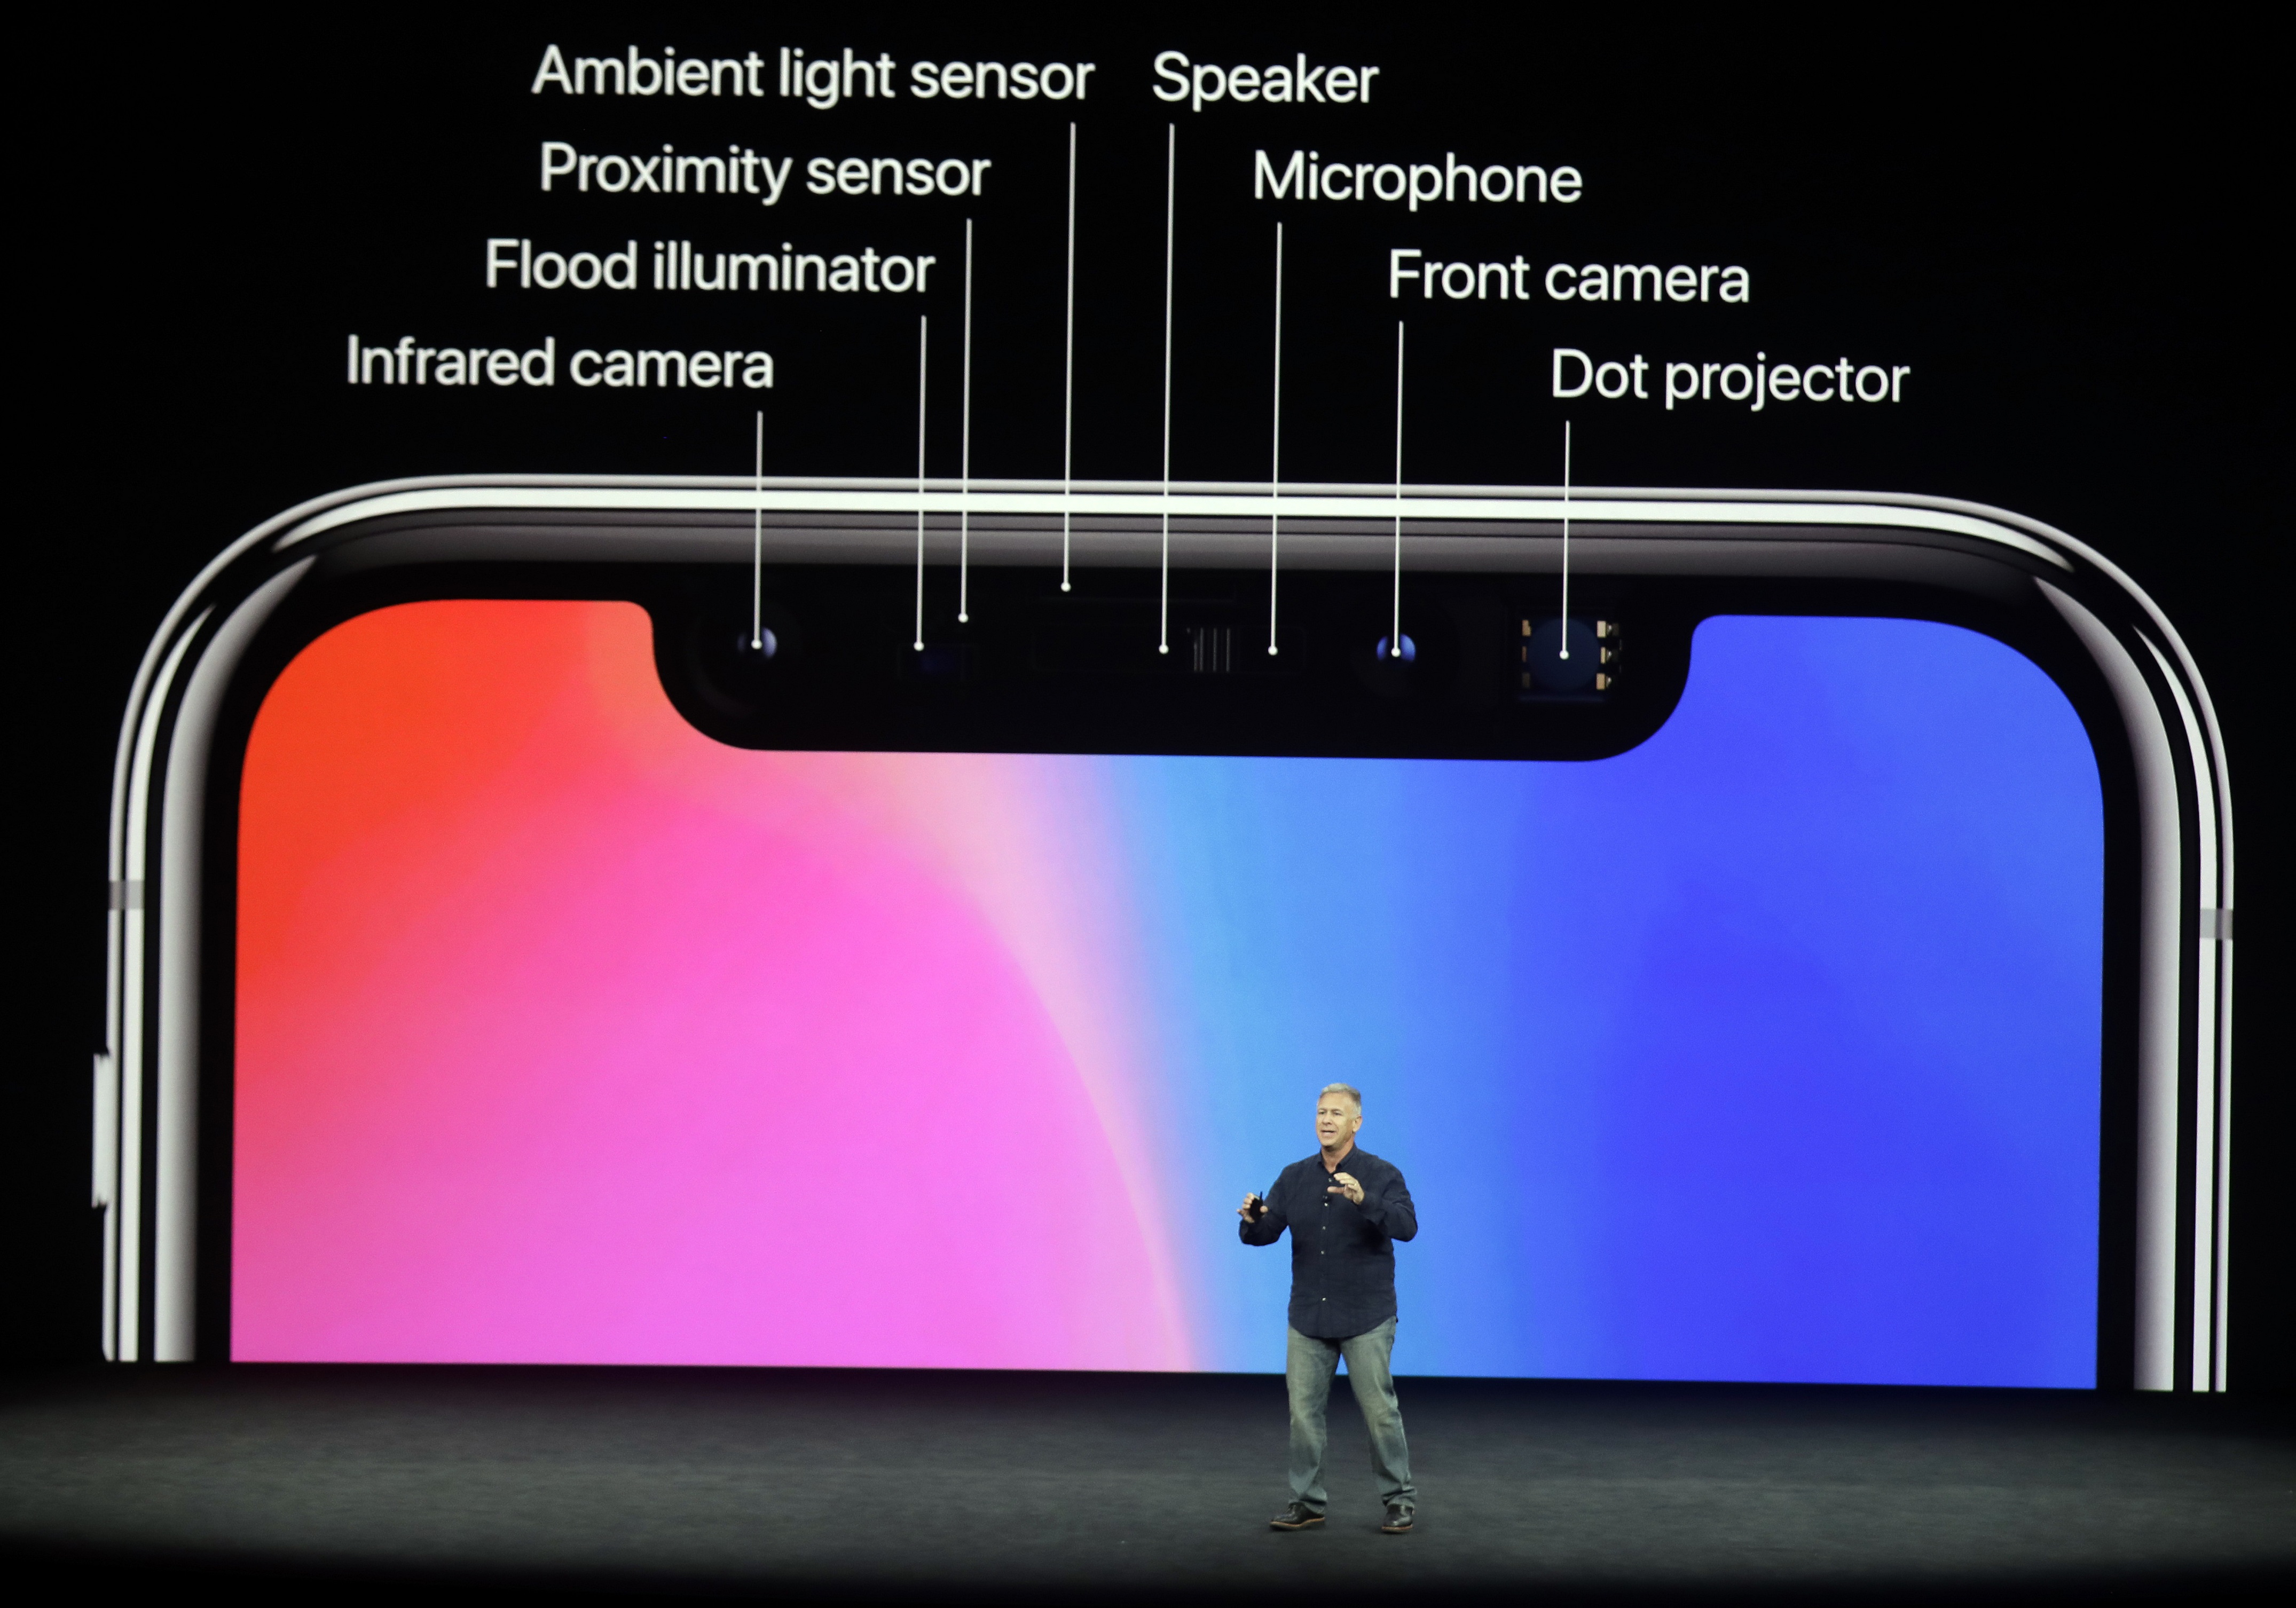 The camera is explained for the iPhone X